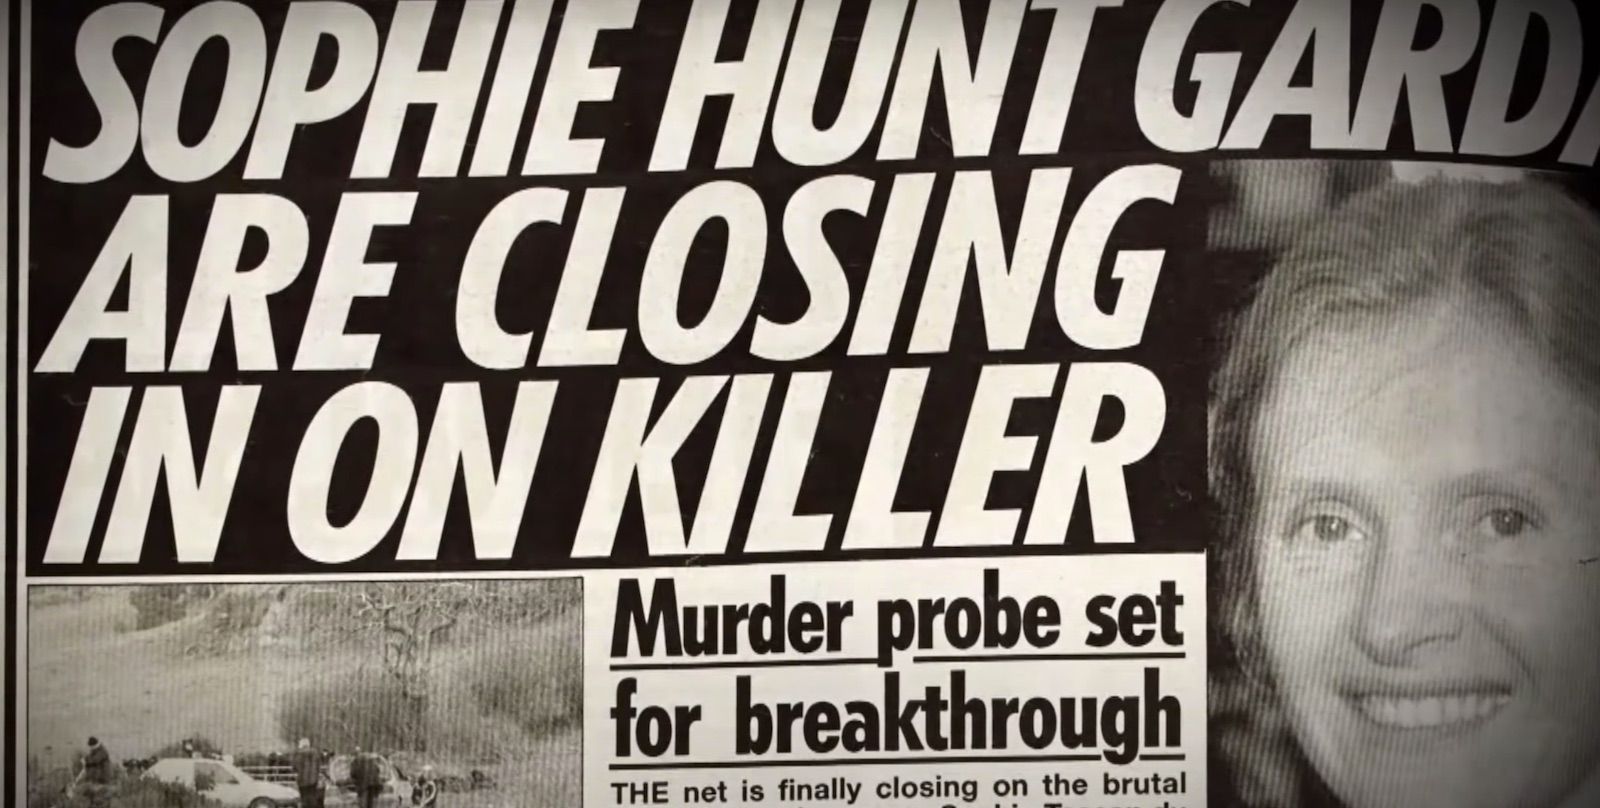 Irish headlines about the murder of Sophie in West Cork, from docu footage.